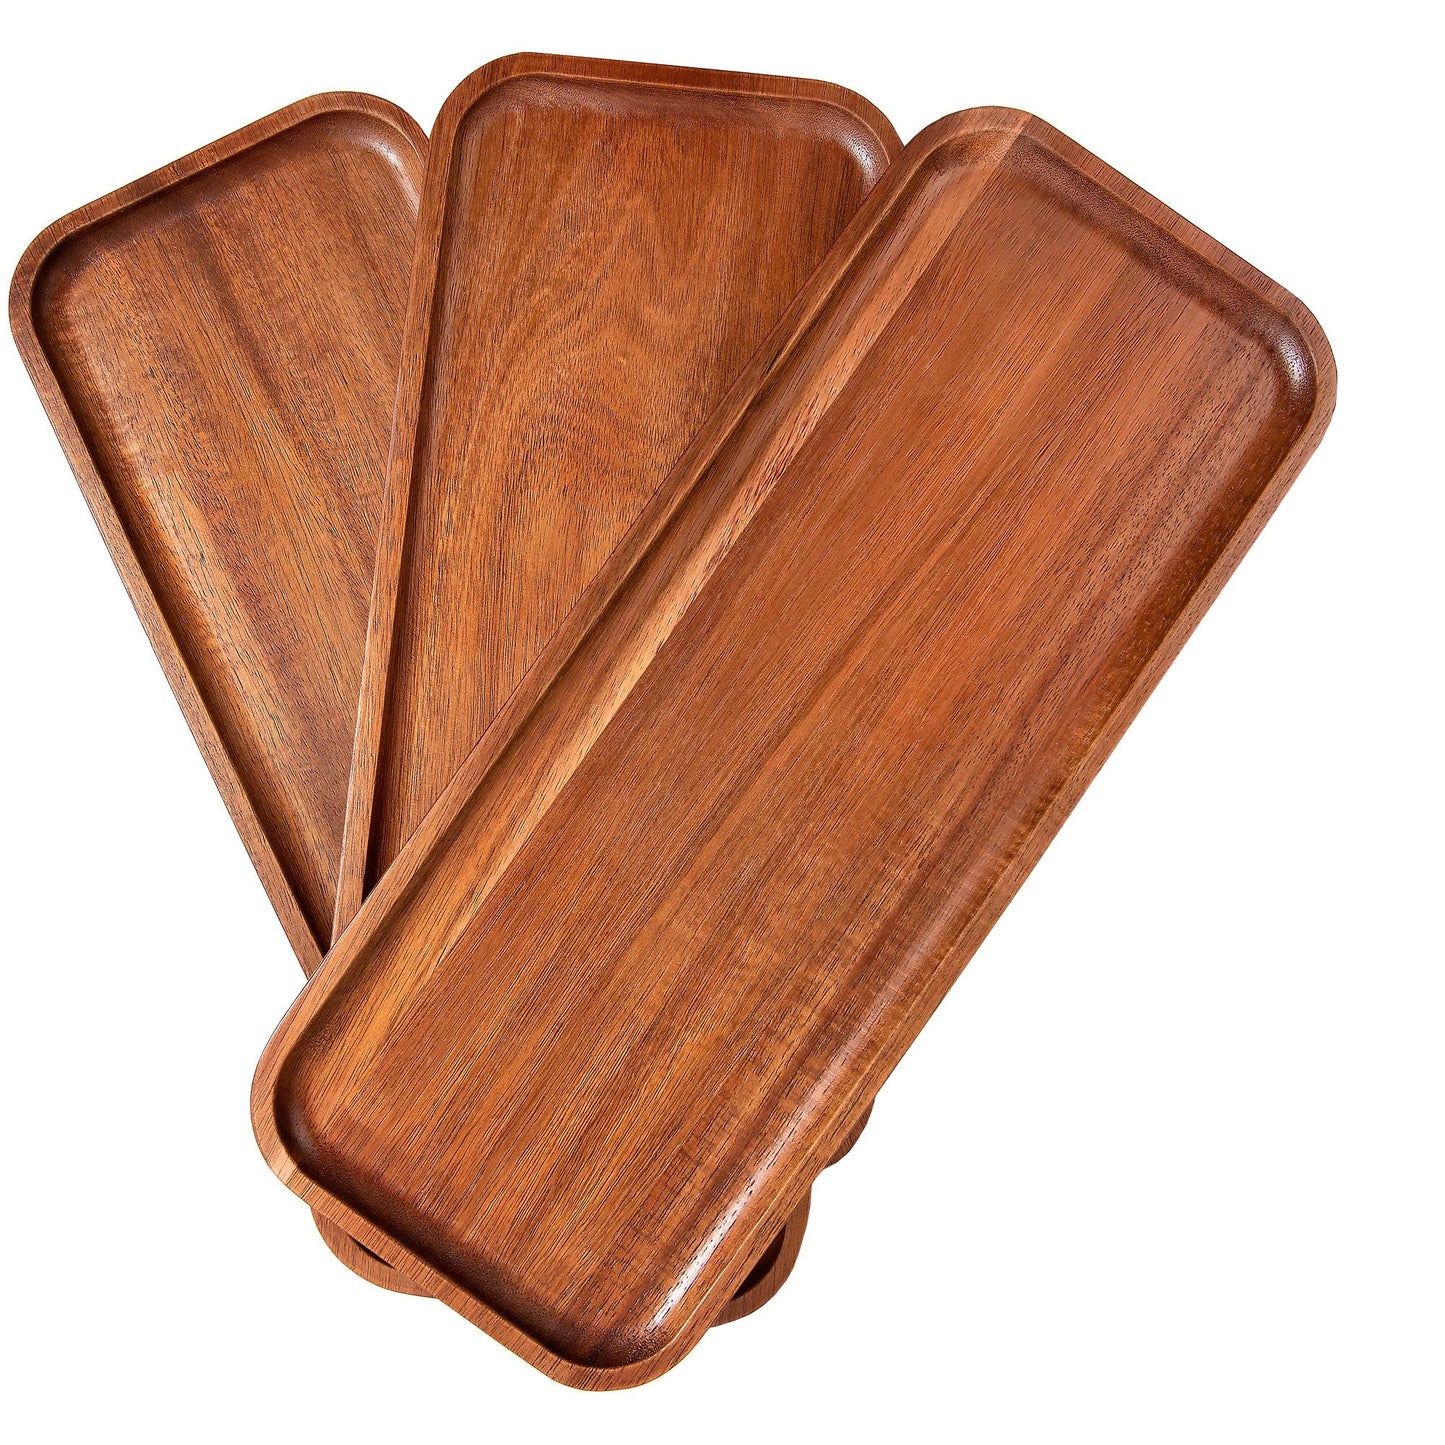 Solid Acacia Wood Serving Trays (14 x 5.5 inches) Rectangular Wooden Large Serving Platters for Food, Wooden Tray for Charcuterie, Appetizer Serving